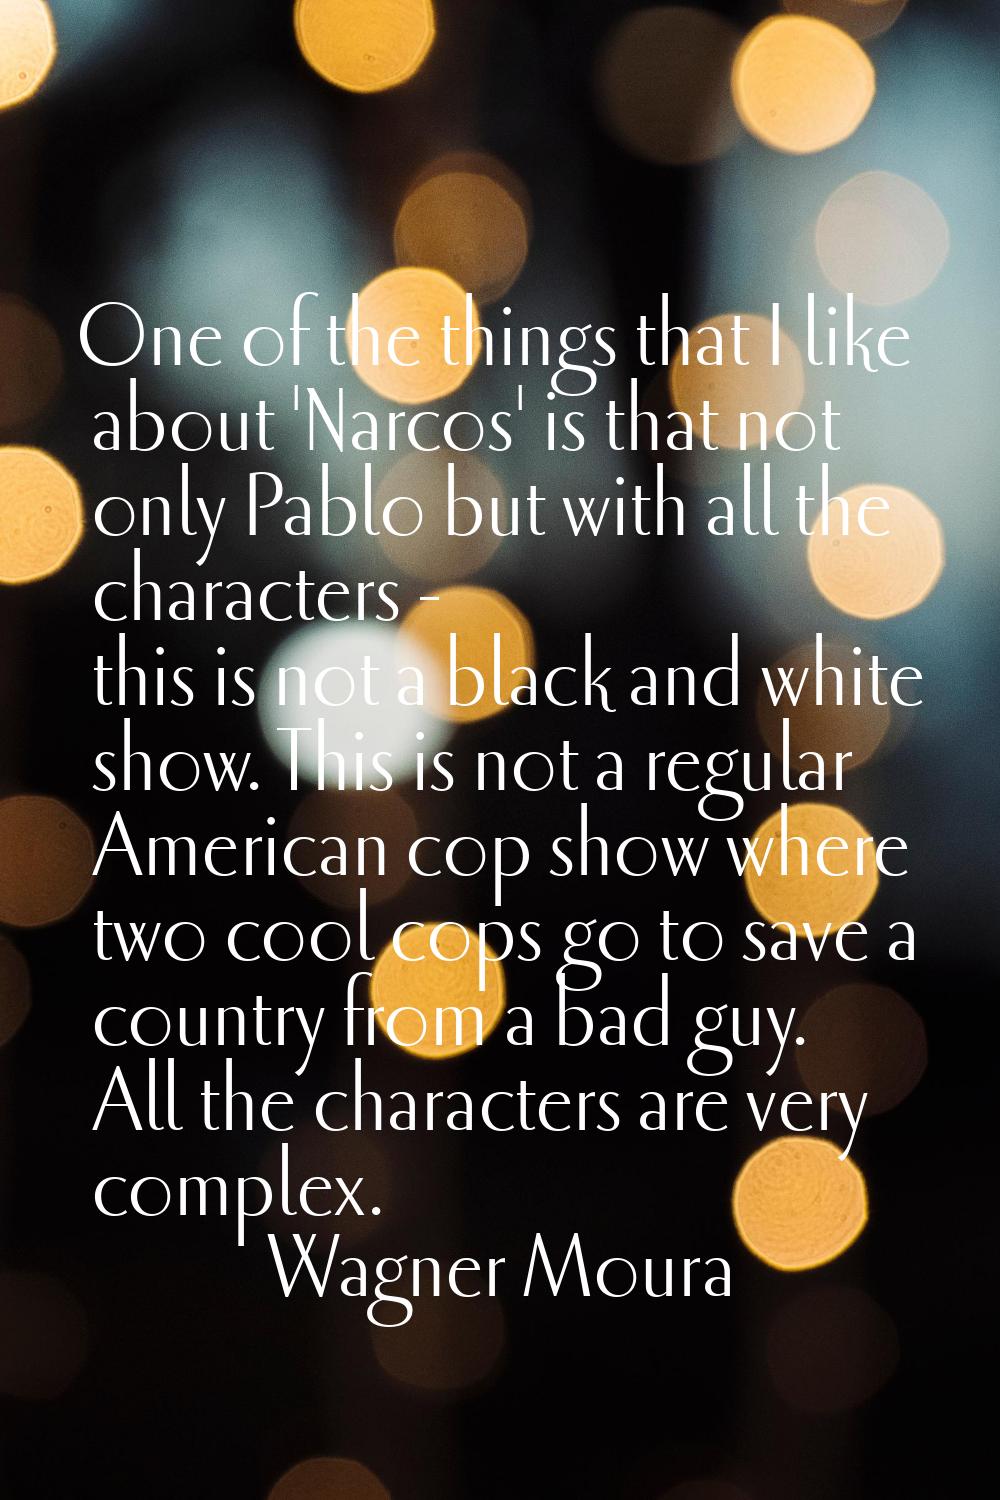 One of the things that I like about 'Narcos' is that not only Pablo but with all the characters - t